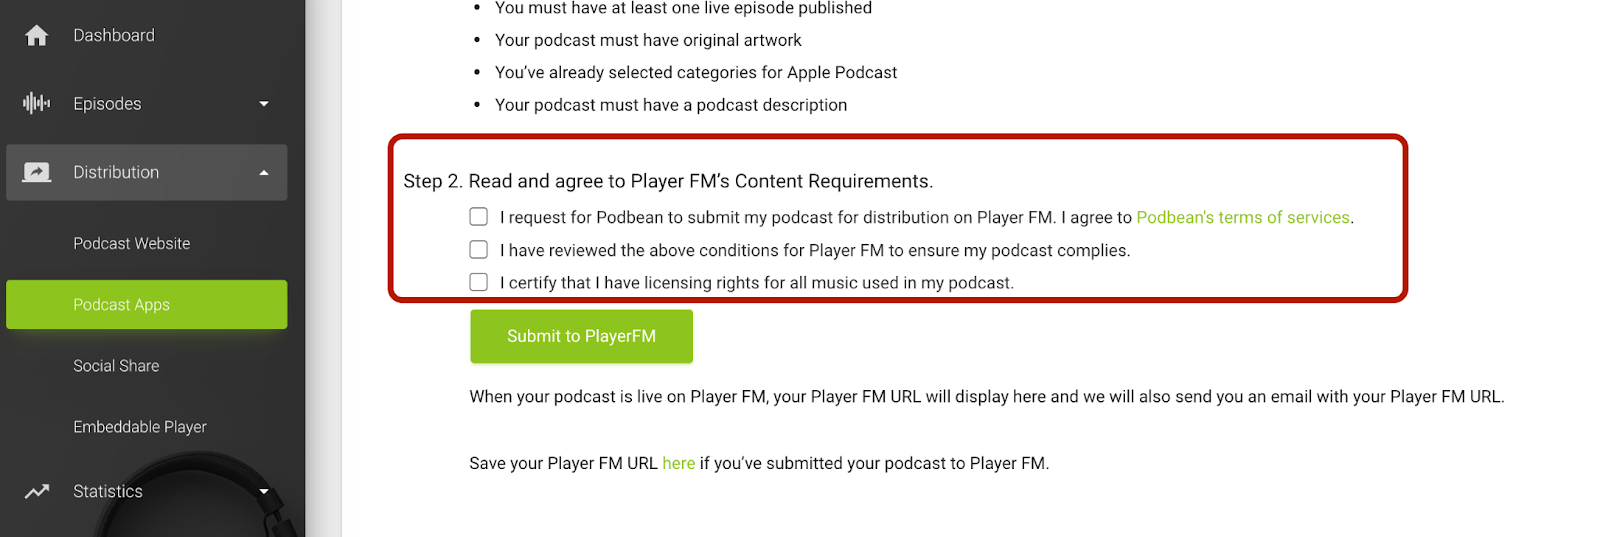 How To Submit Your Podcast To PlayerFM